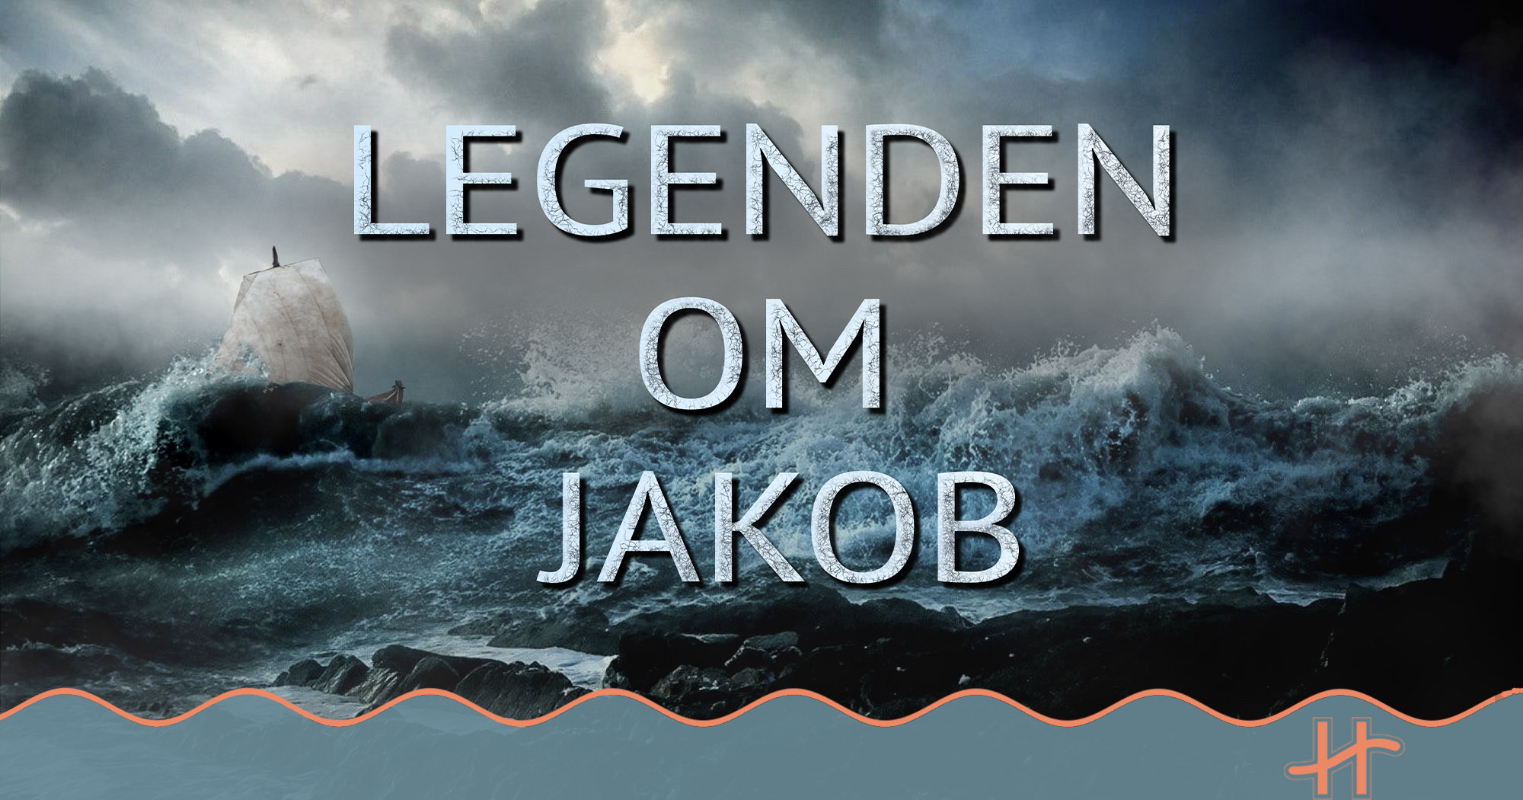 May be a graphic of banner, poster and text that says 'LEGENDEN OM JAKOB 十'